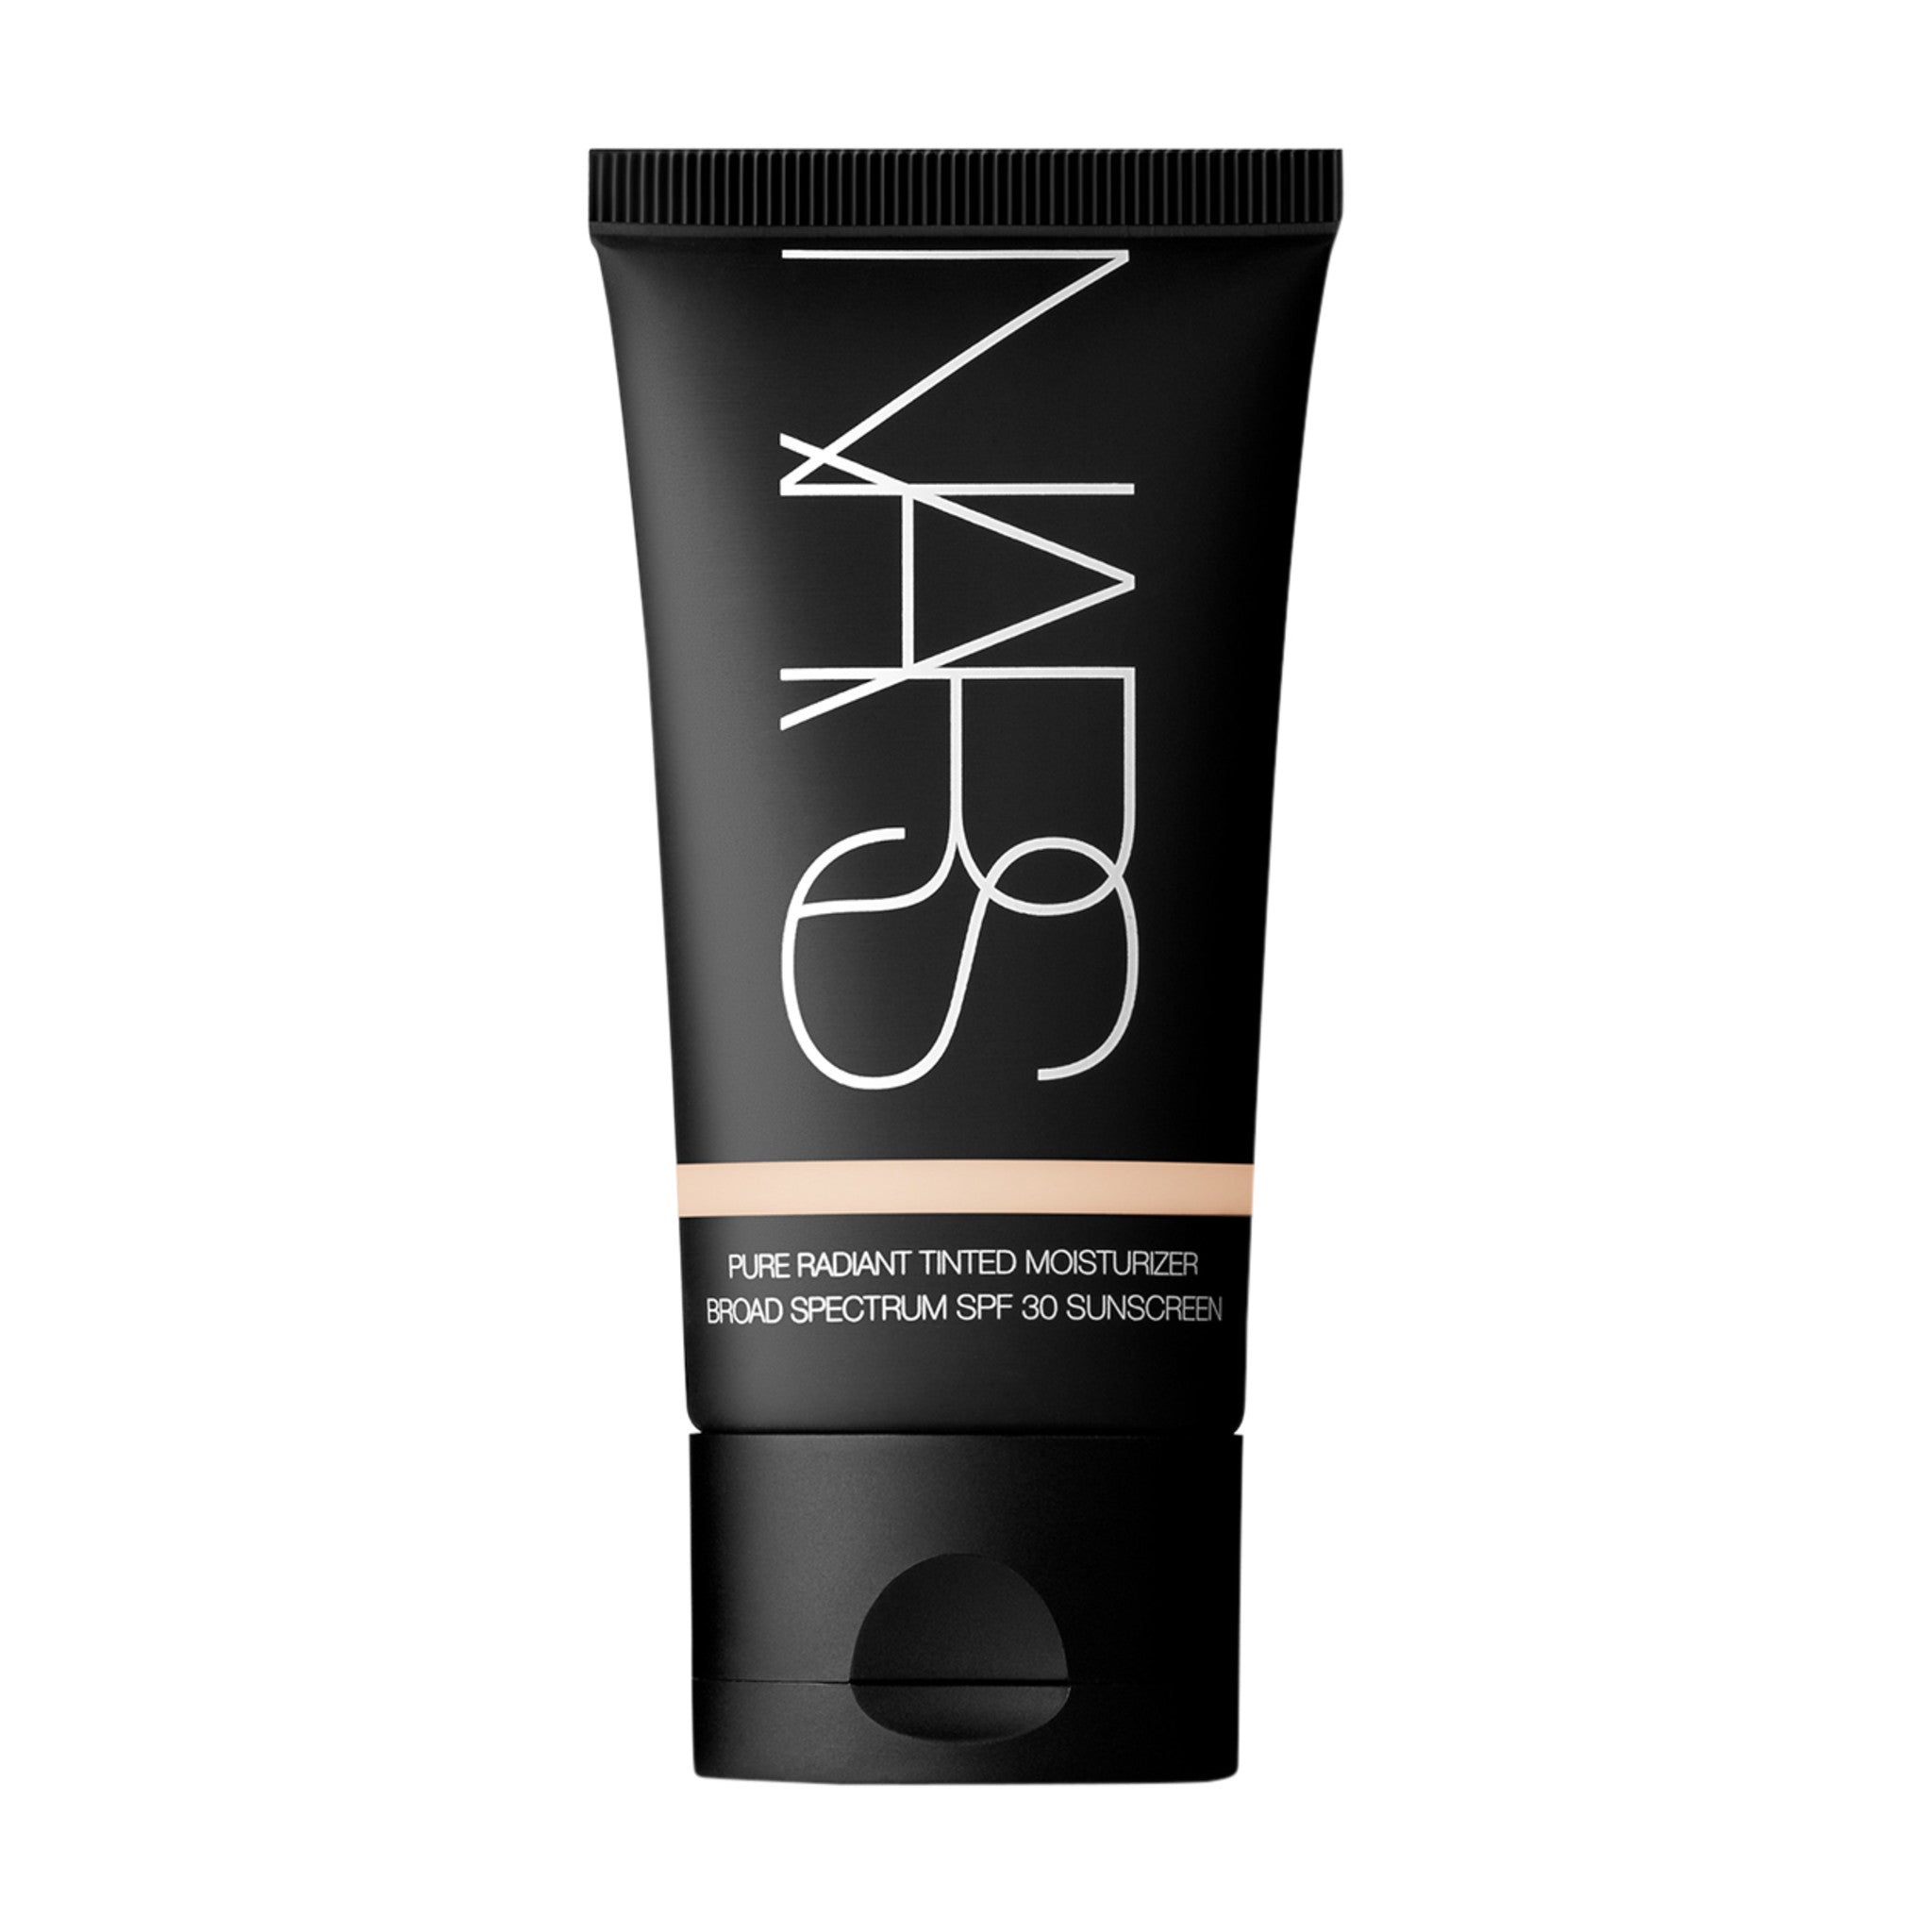 Nars Pure Radiant Tinted Moisturizer Broad Spectrum SPF 30 Color/Shade variant: Terre-Neuve L0 main image. This product is for light cool complexions